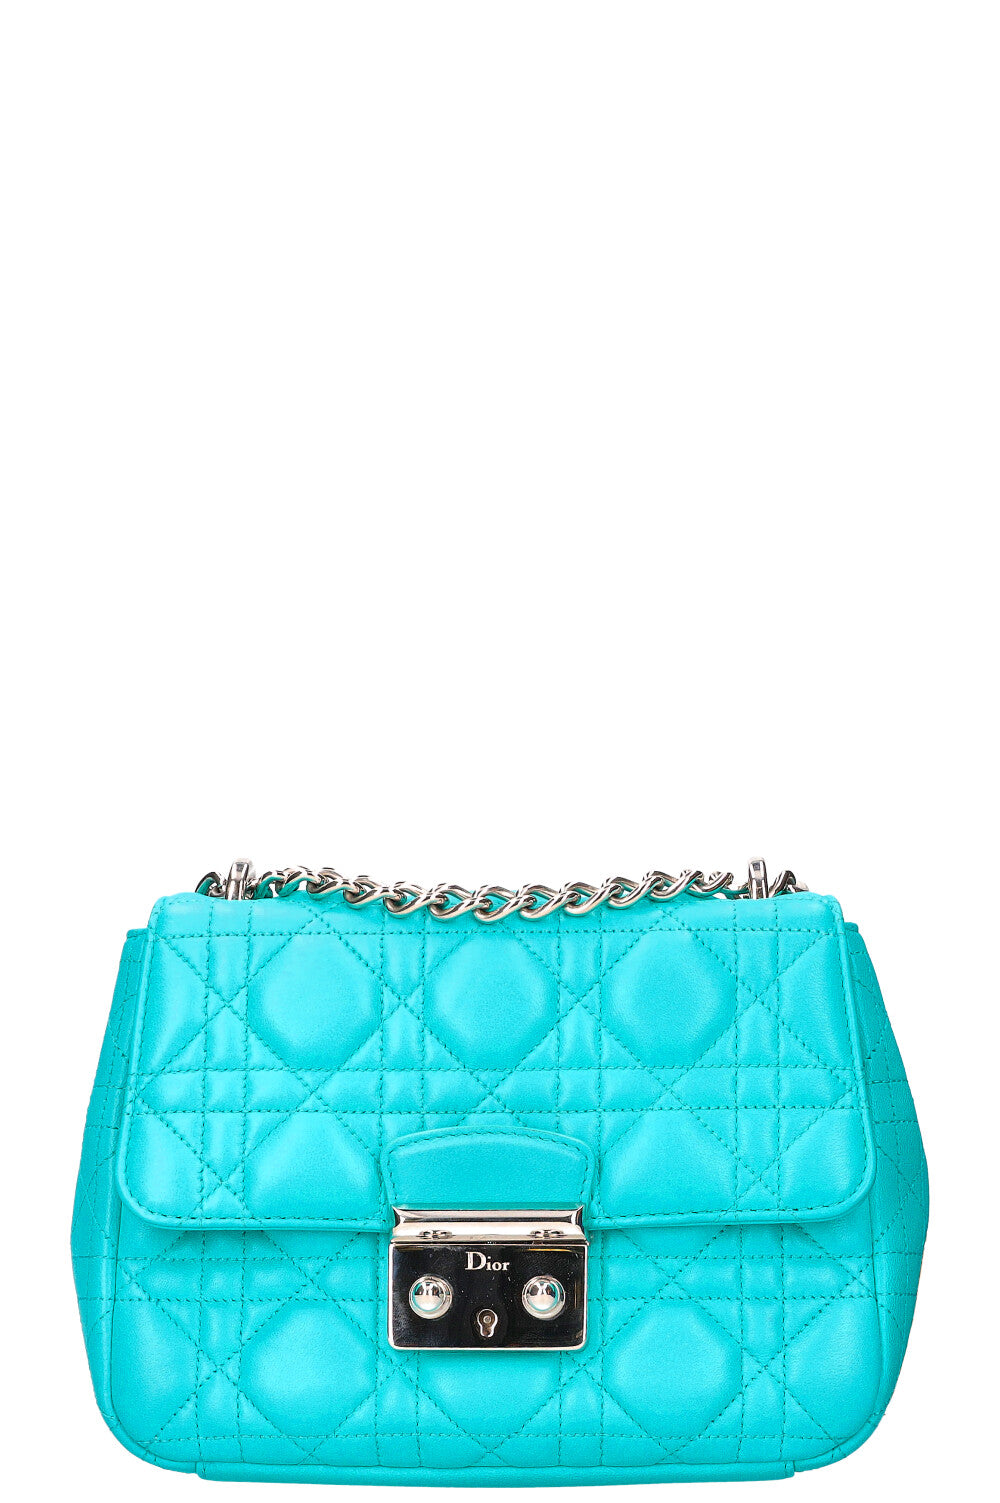 CHRISTIAN DIOR Miss Dior Small Shoulder Bag with Wallet Turquoise